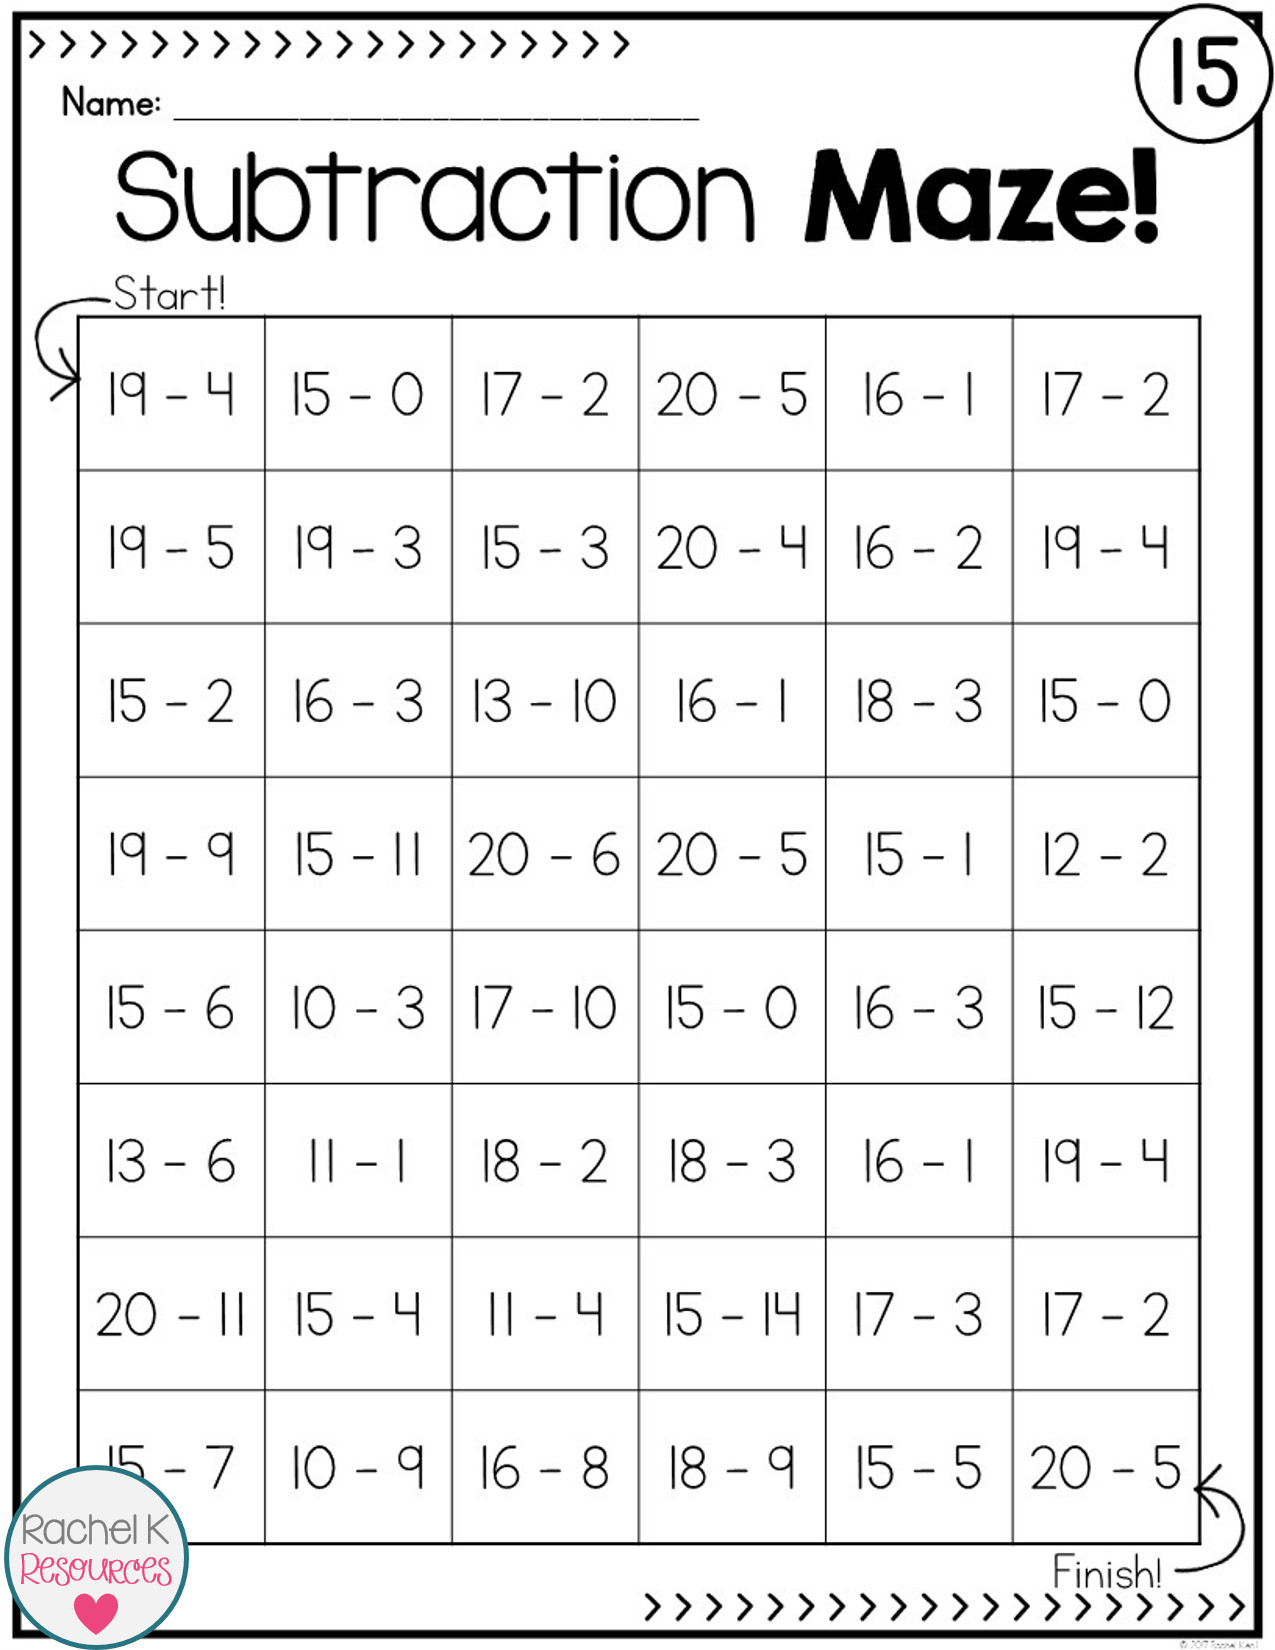 Free Math Worksheets Second Grade 2 Addition Adding whole Tens 3 Digits Missing Number